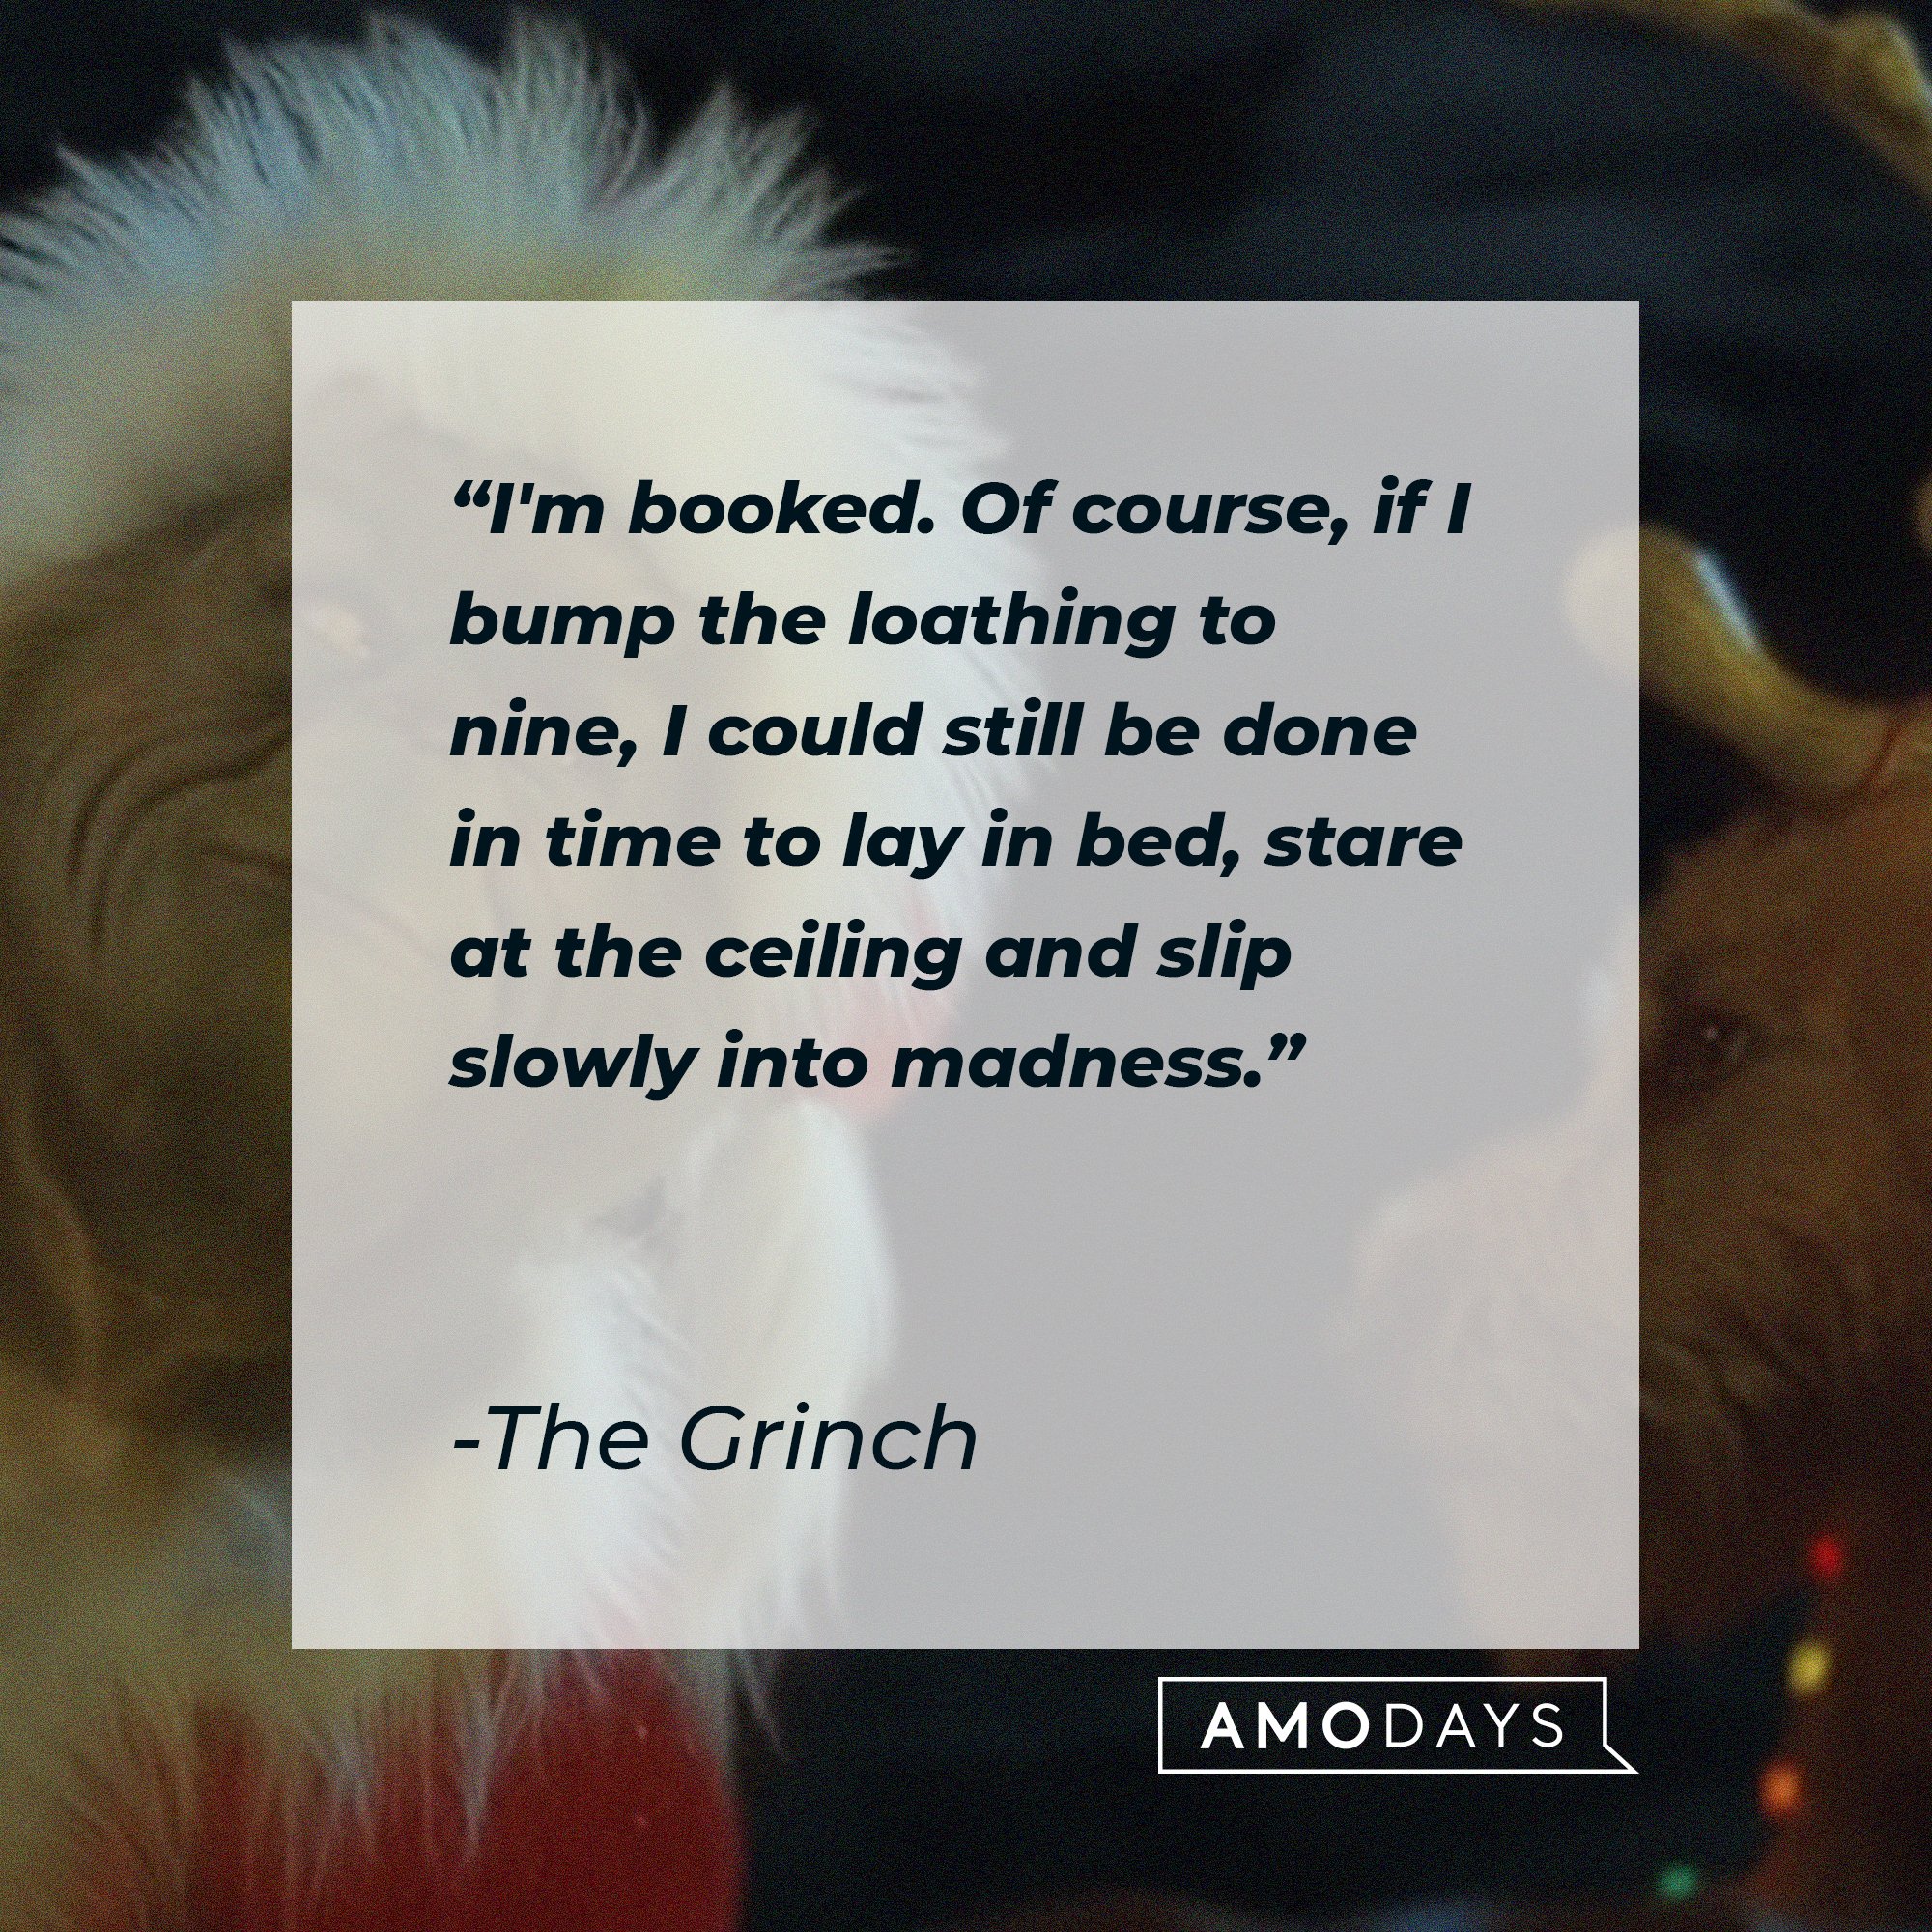 The Grinch’s quote: “I'm booked. Of course, if I bump the loathing to nine, I could still be done in time to lay in bed, stare at the ceiling and slip slowly into madness.” | Image: AmoDays